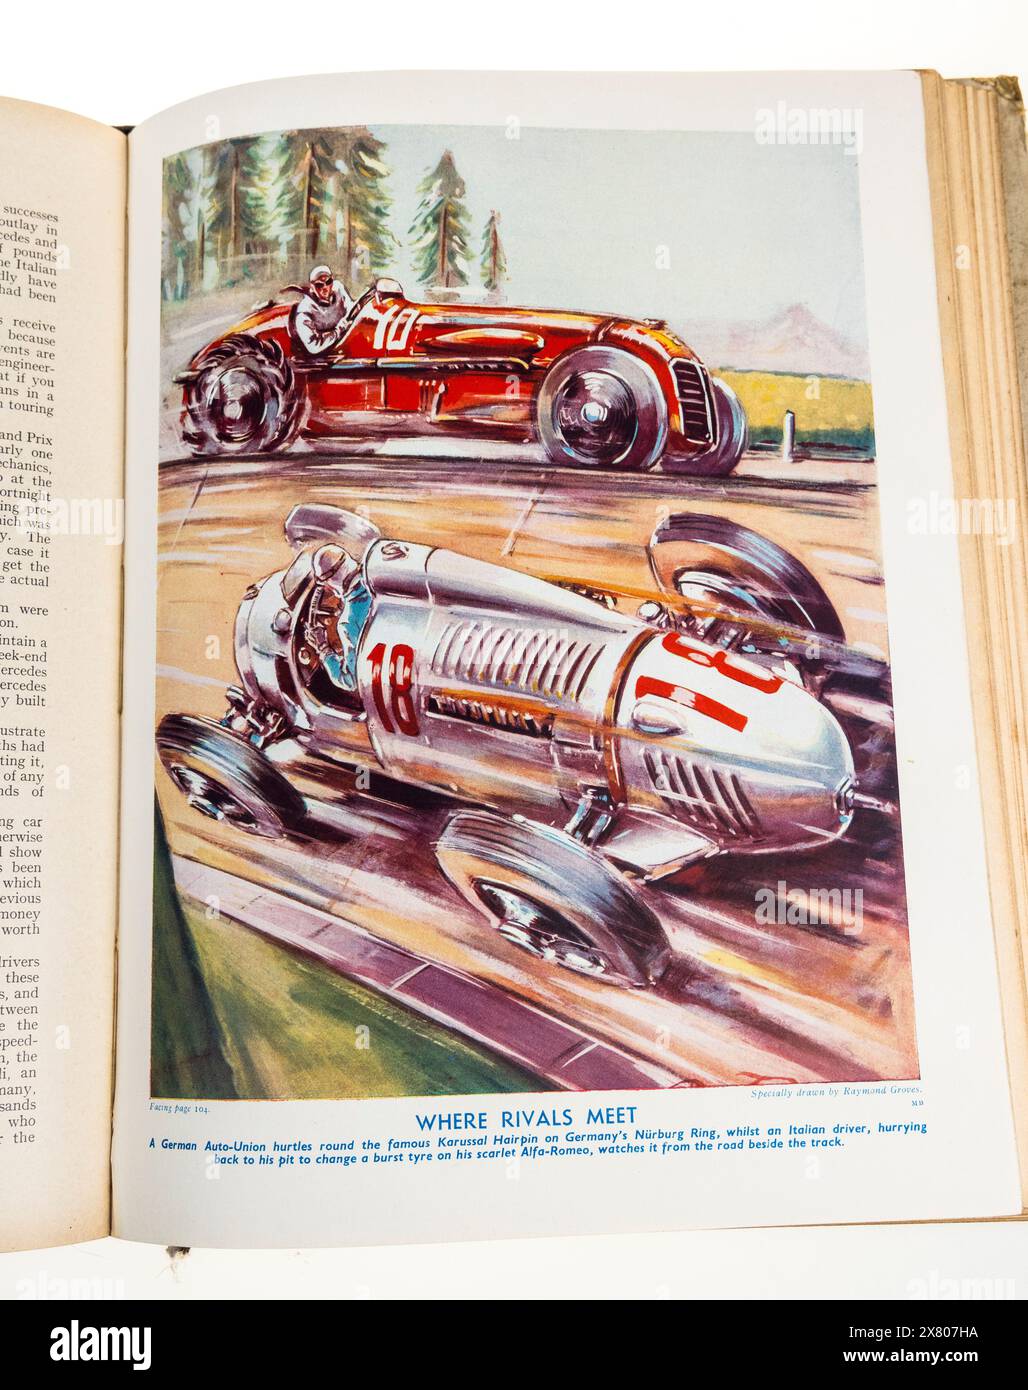 Racing cars in The Modern Boy's Annual, 1938, showing the Karussal Hairpin bend on Germany's Nurburg Ring Stock Photo